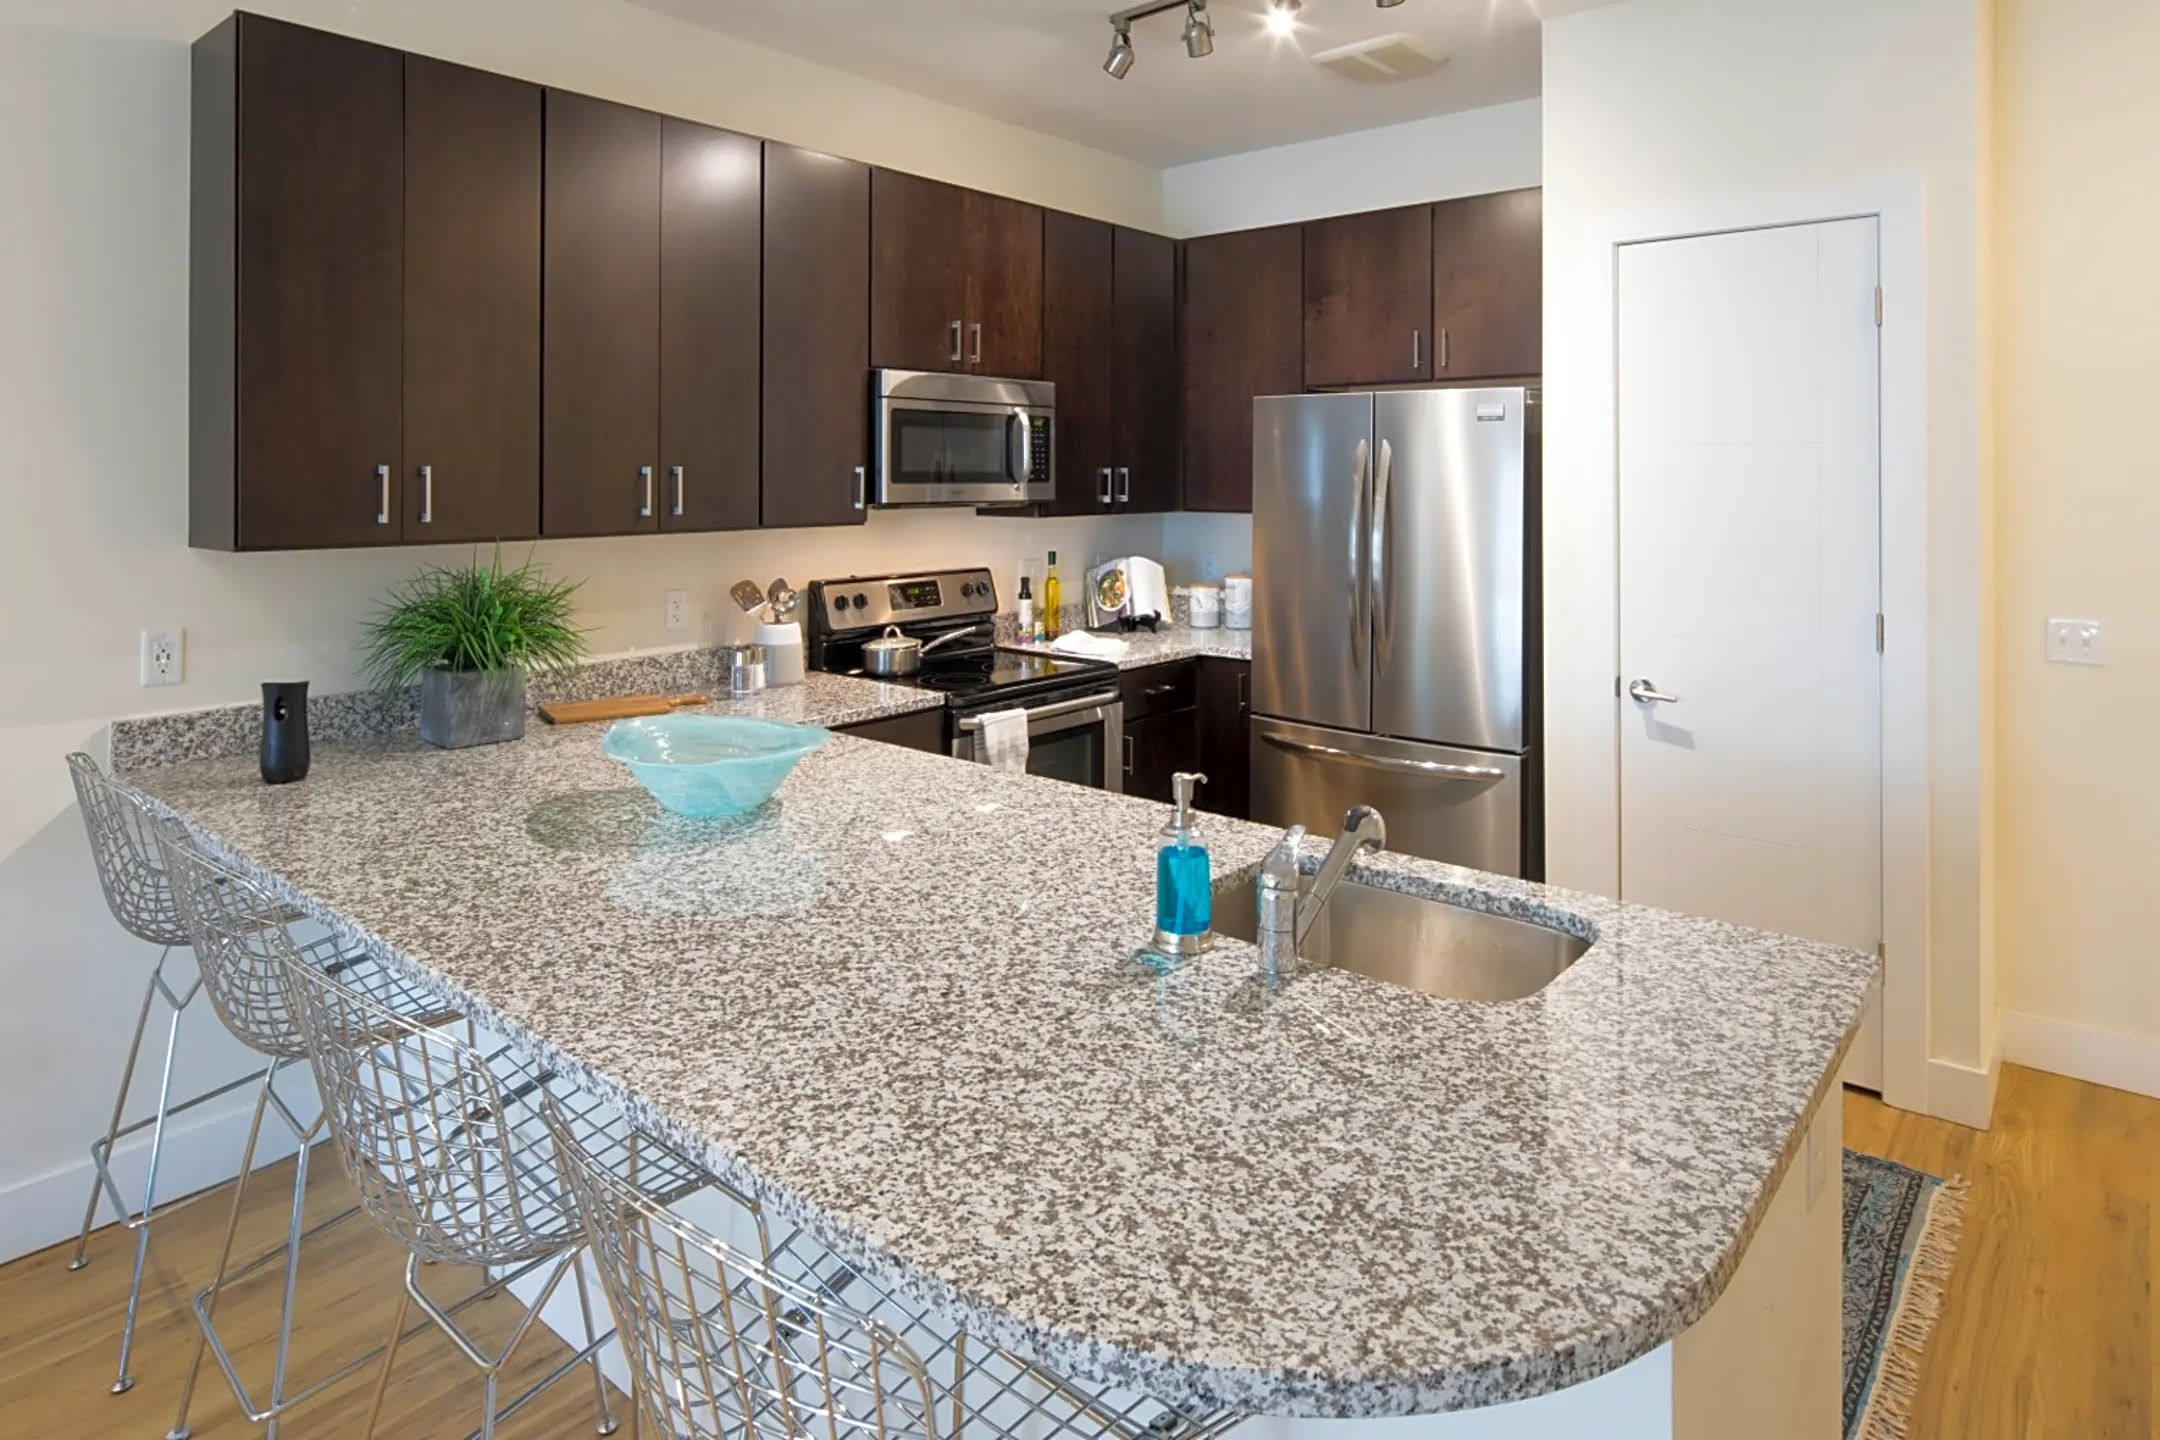 Kitchen - The Residences at Annapolis Junction - Annapolis Junction, MD